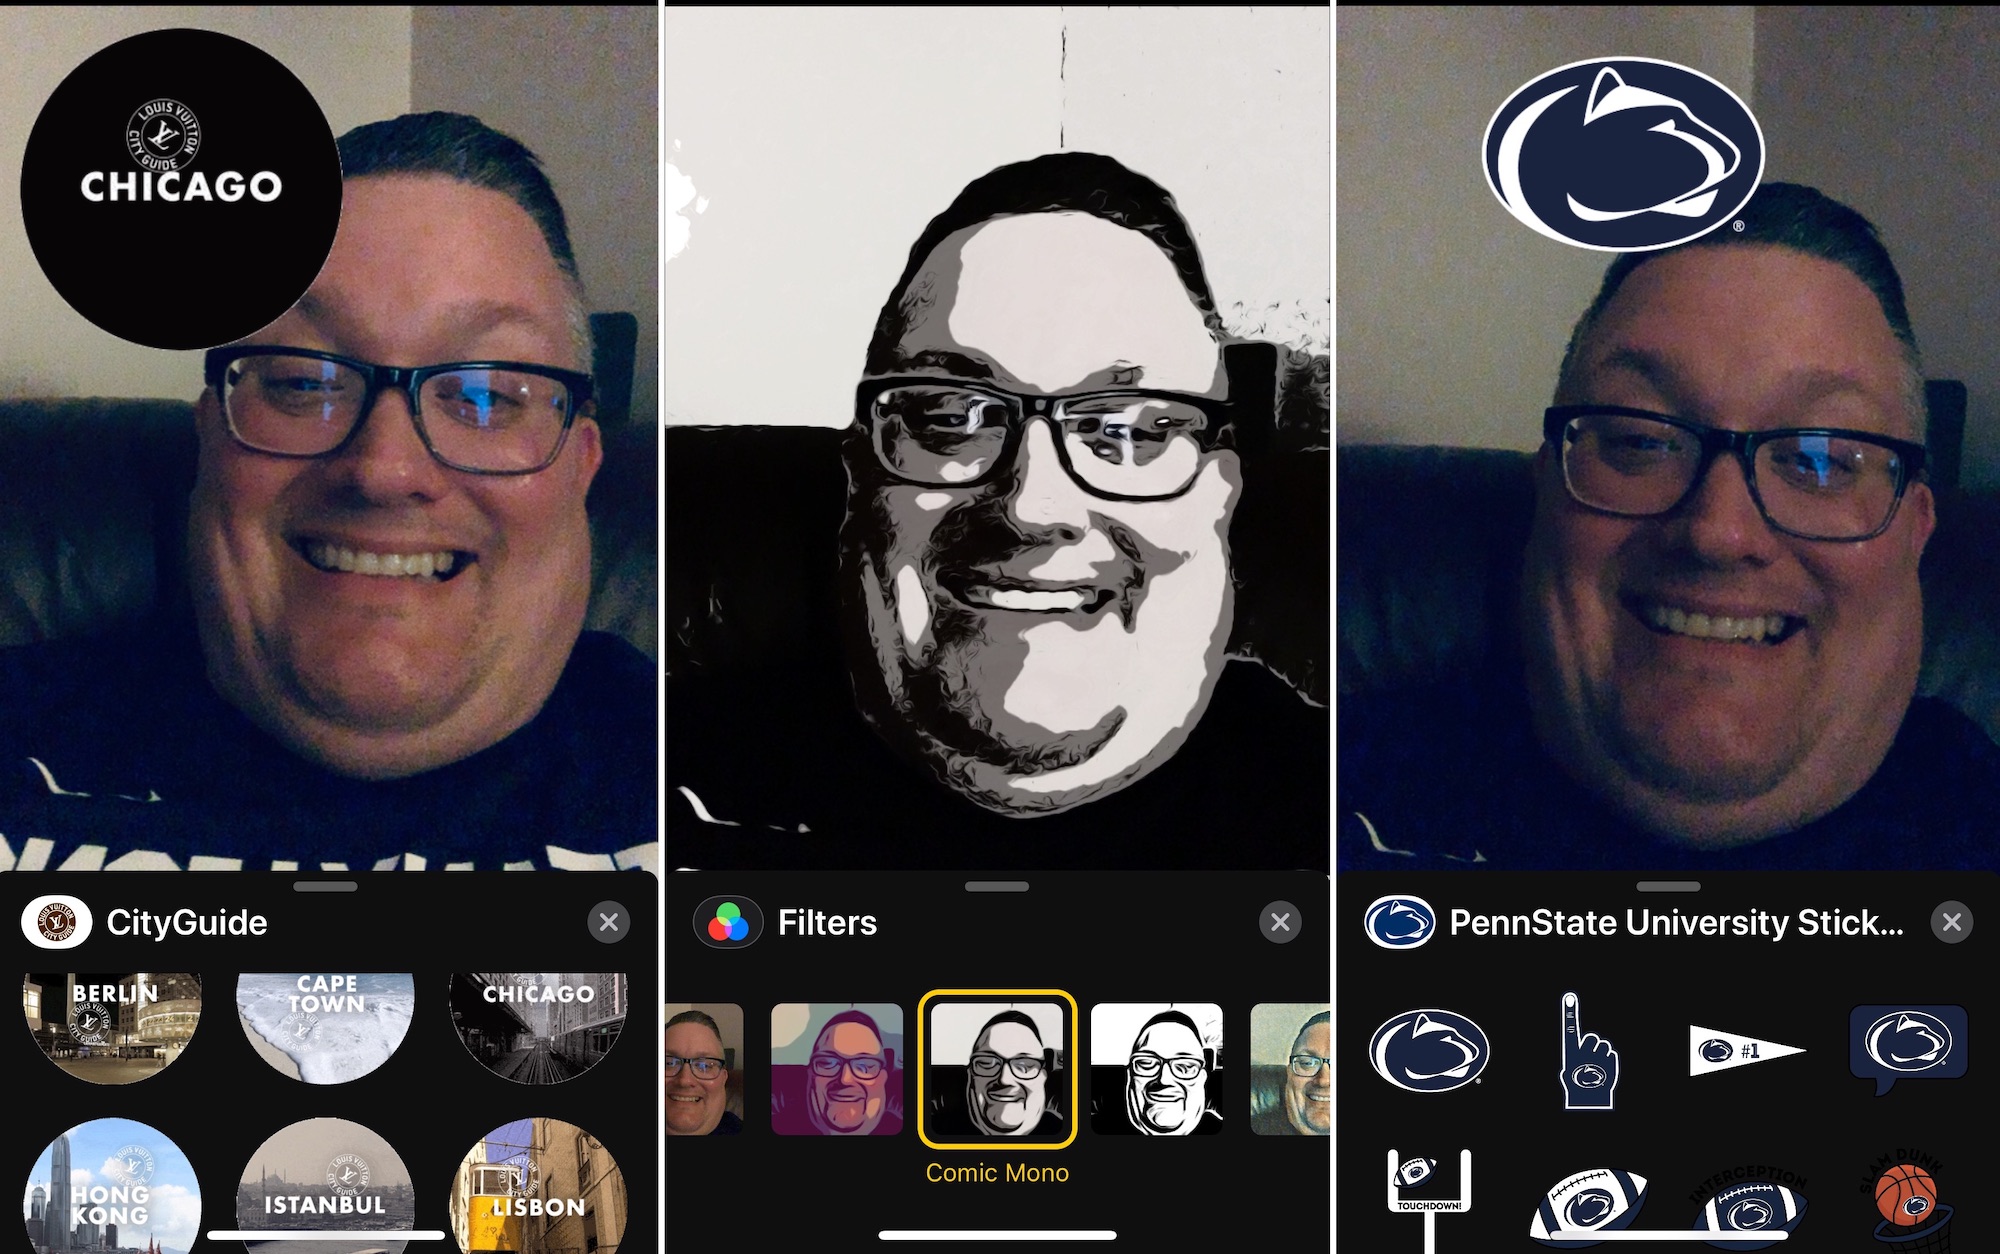 How to Use FaceTime Camera Effects like Animoji and Stickers During Video Calls?